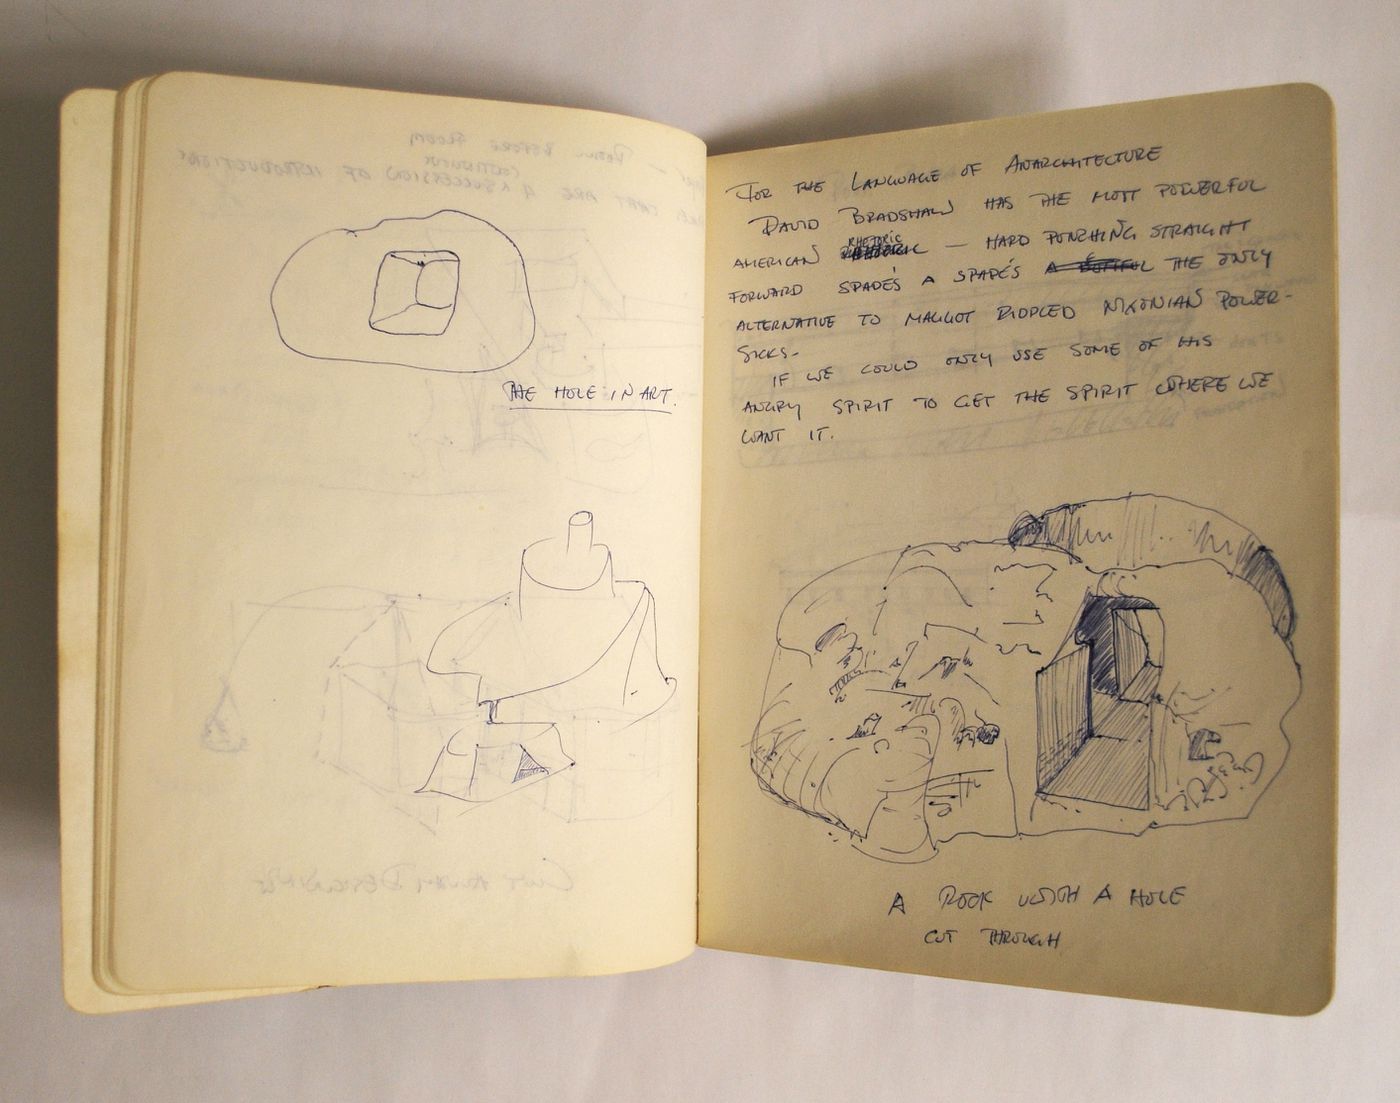 Composition notebook of sketches and notes for Automation House, Tree Dance, and A W-Hole House, and Anarchitecture